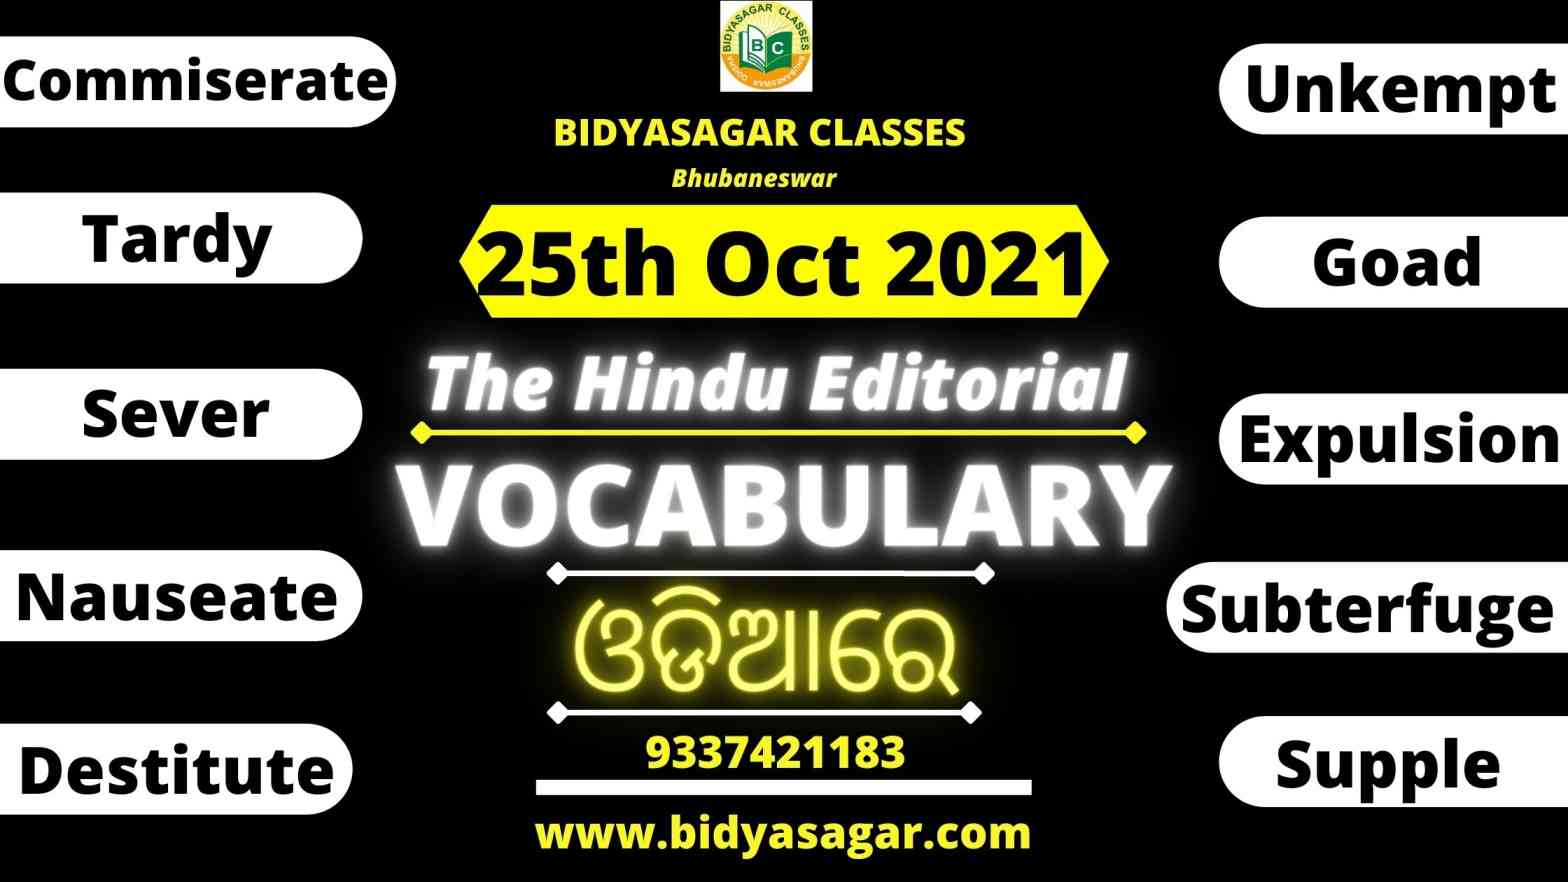 The Hindu Editorial Vocabulary of 25th October 2021